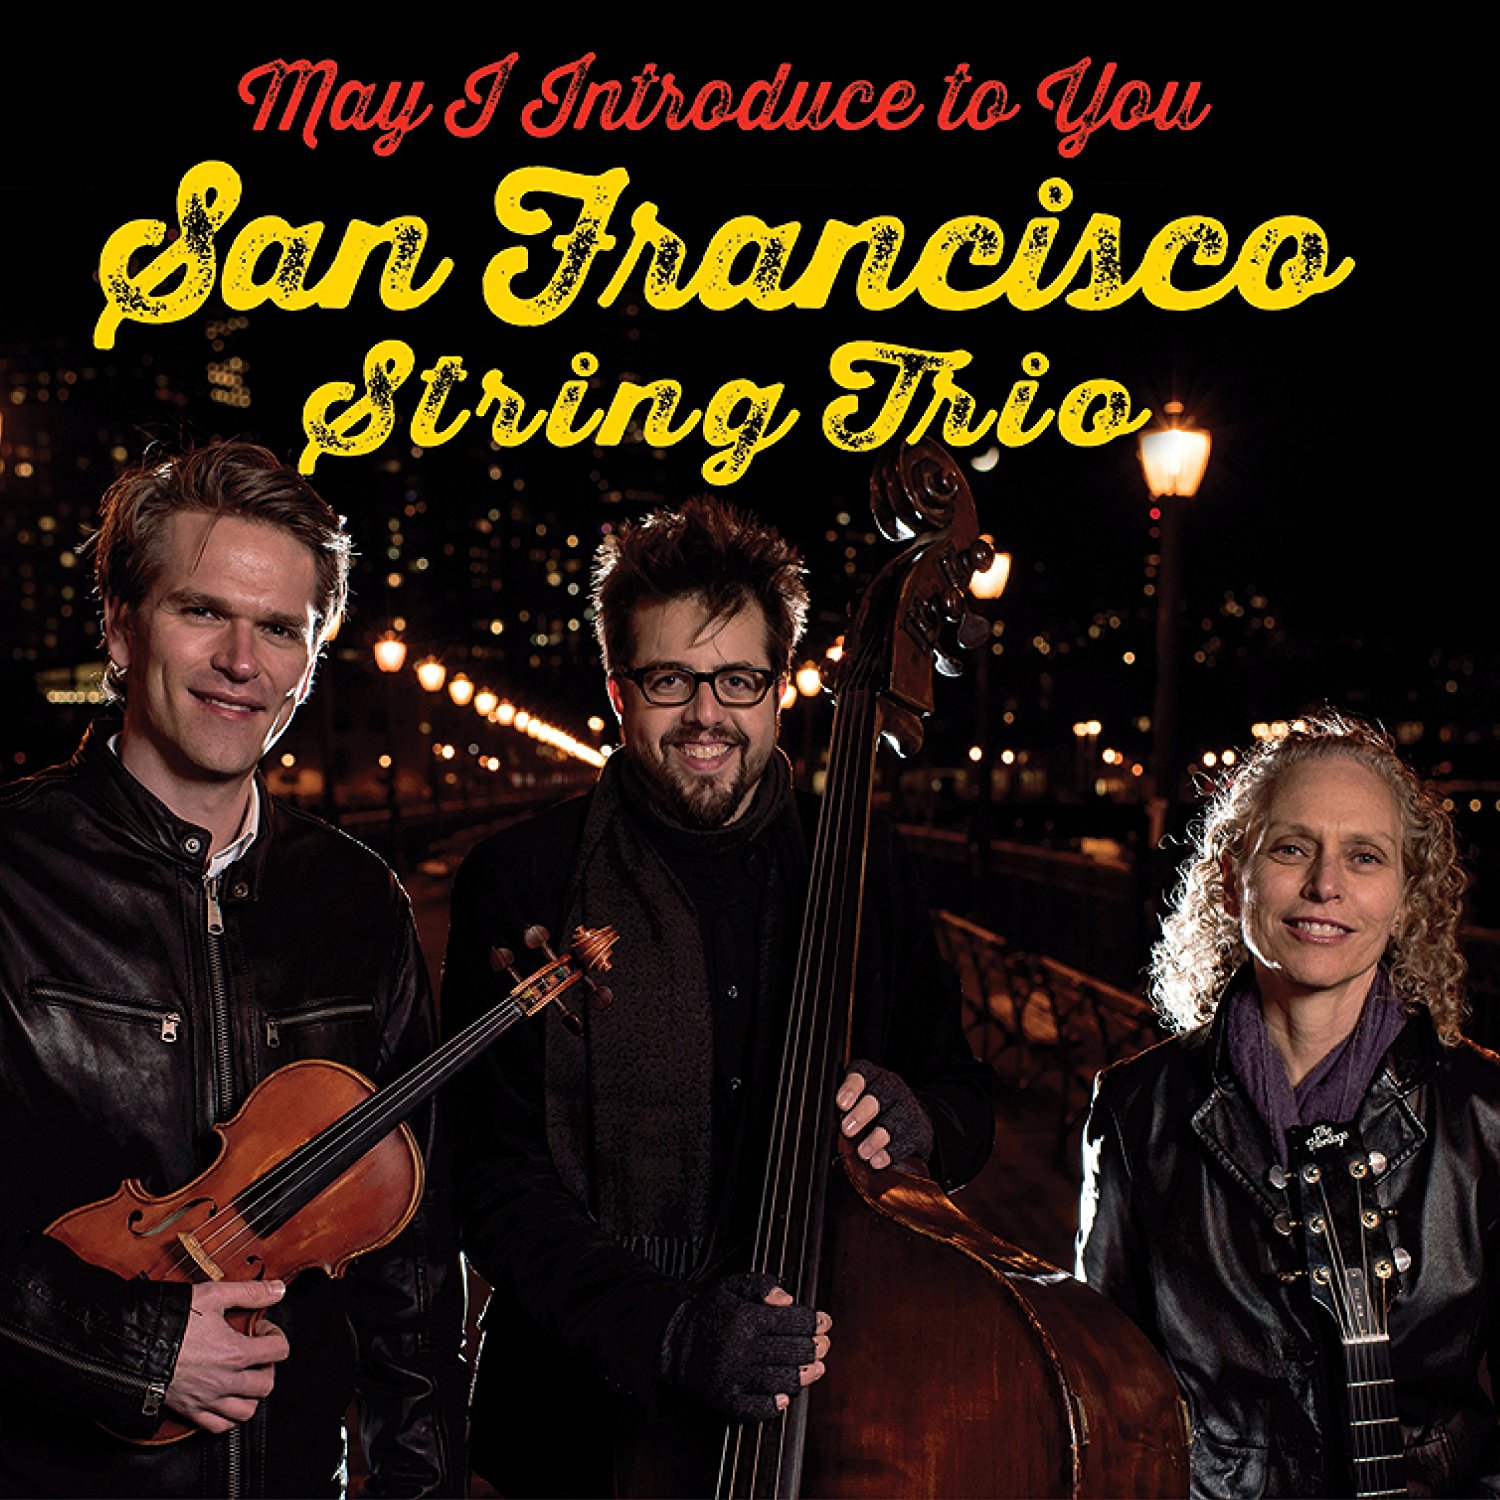 SAN FRANCISCO STRING TRIO - May I Introduce To You cover 